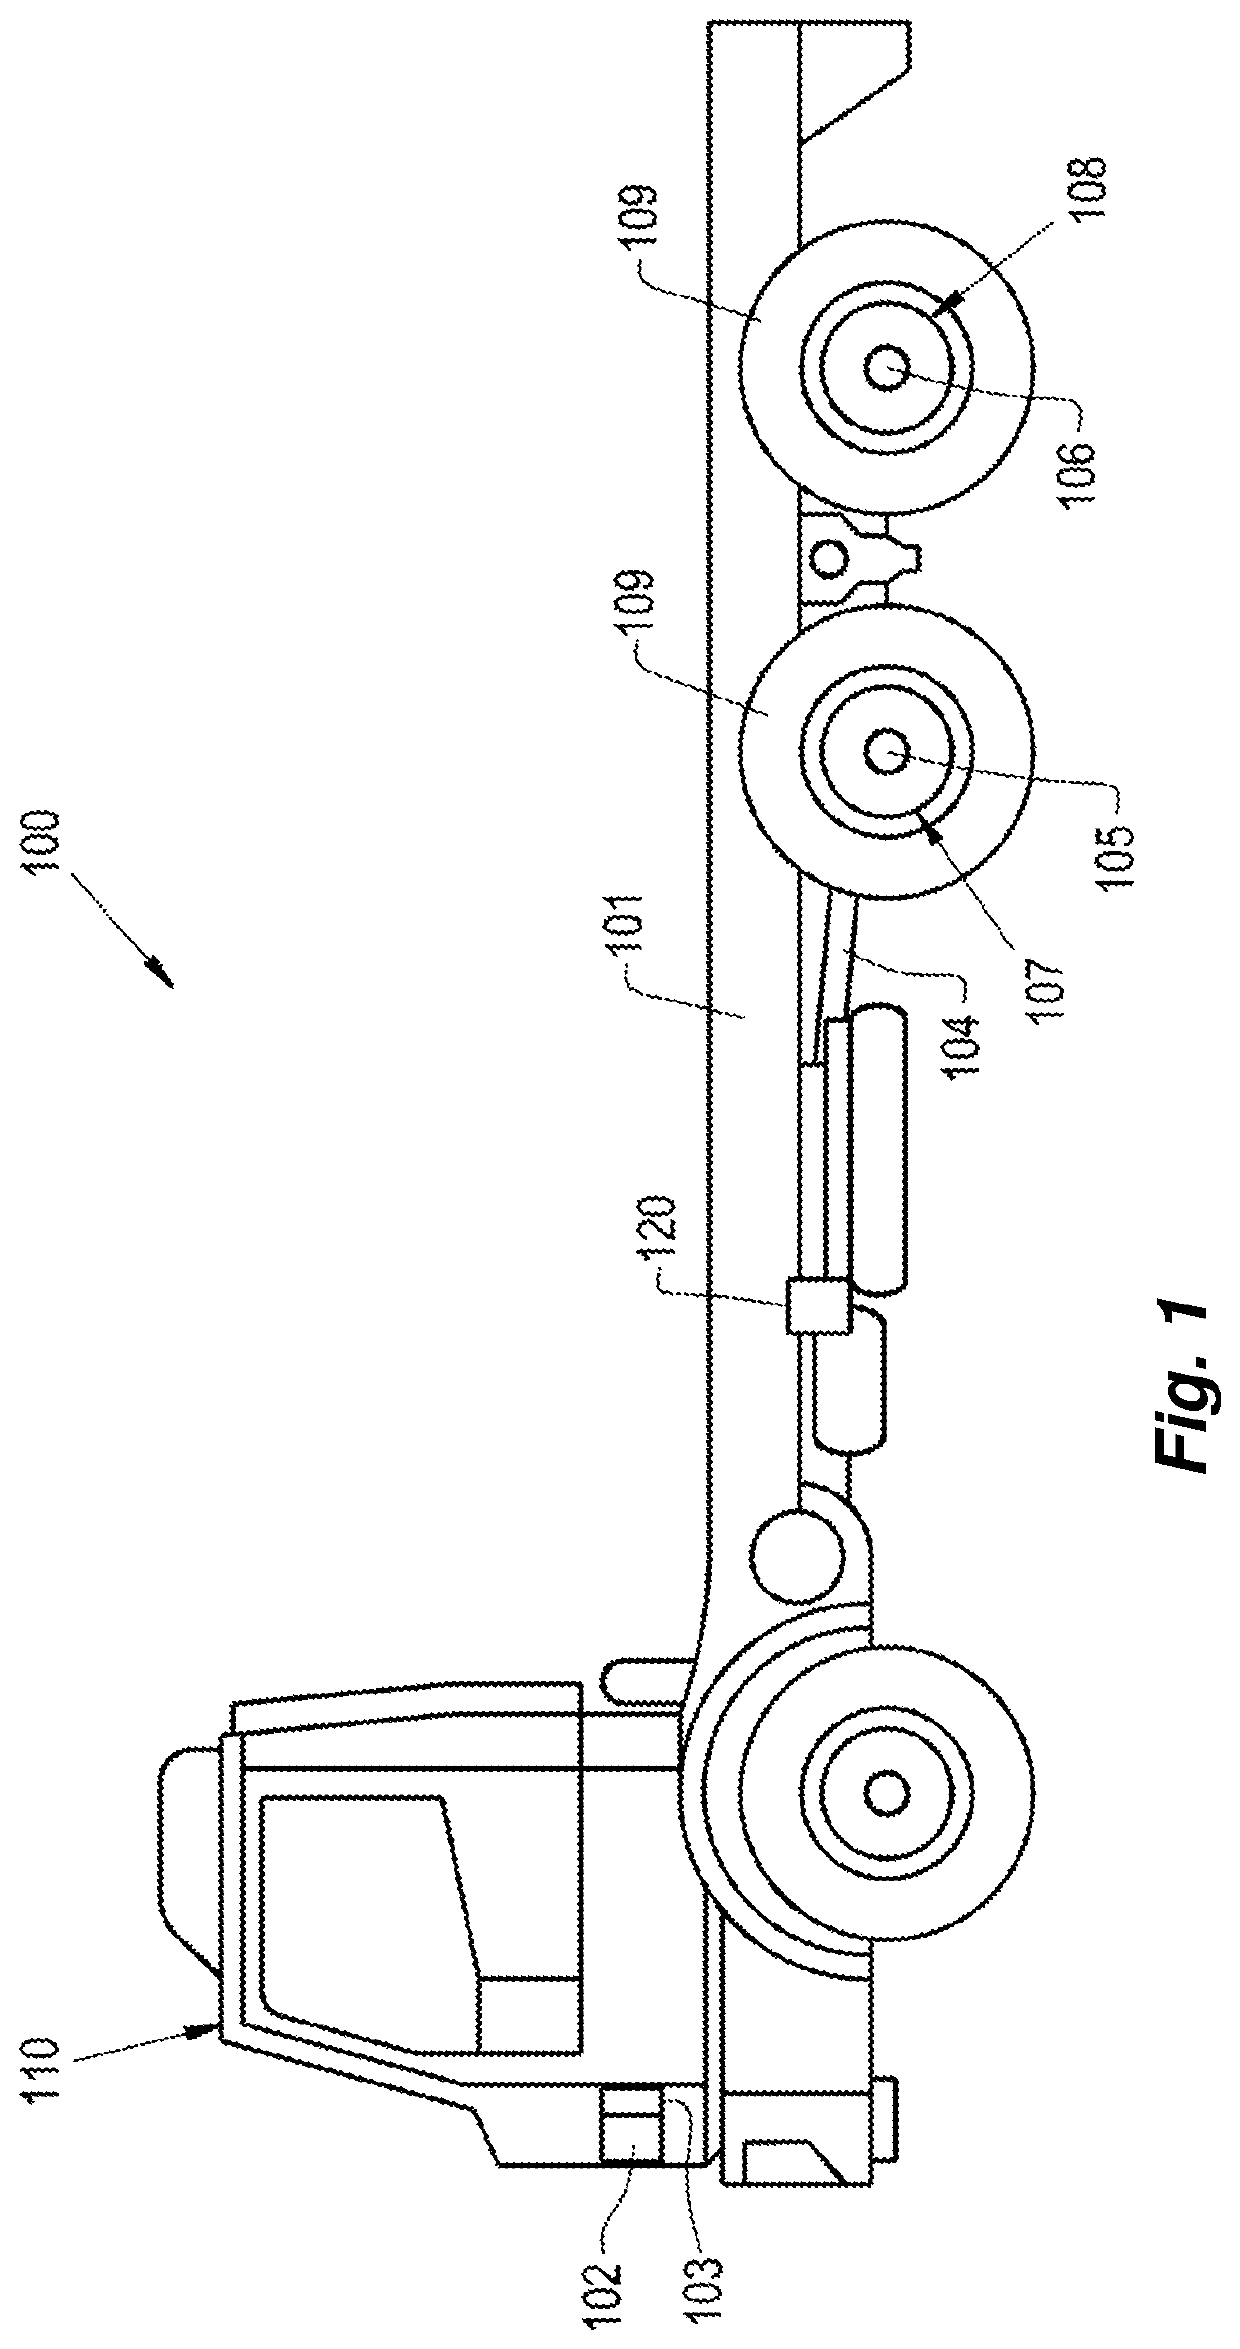 Epicyclic reducer for a wheel hub and vehicle